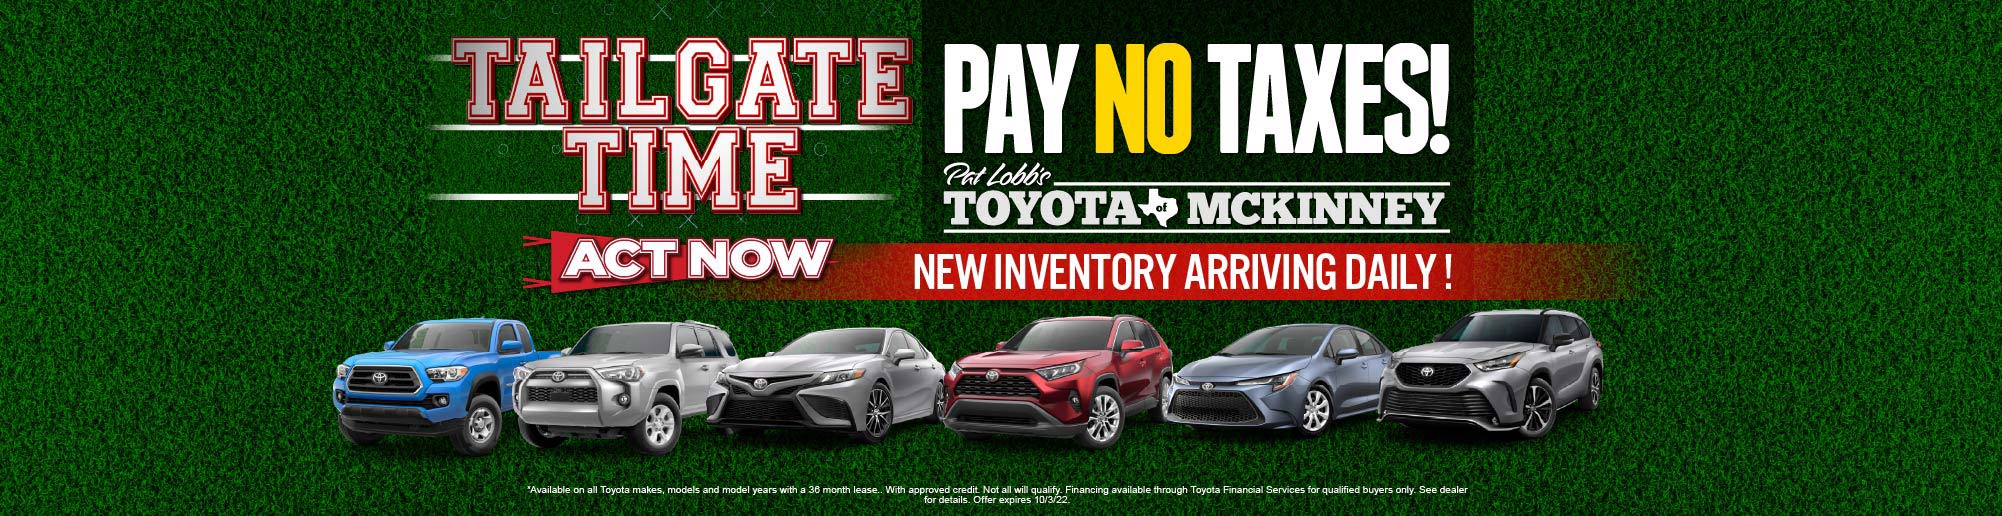 Pay No taxes! New Inventory Arriving Daily, Act Now.